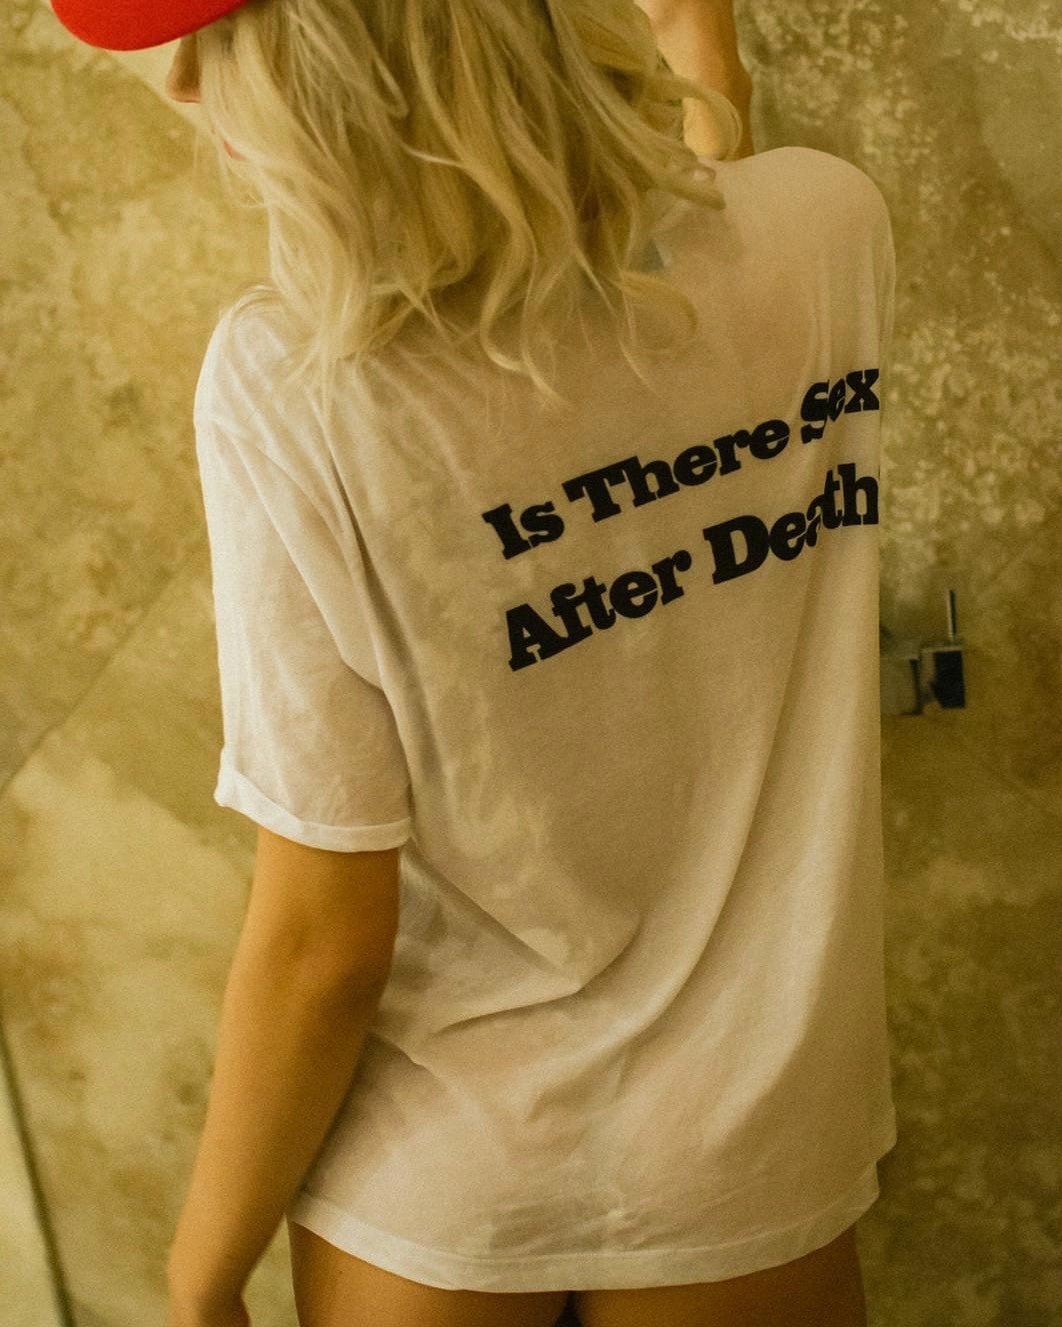 Photo by Masquenada with the username @Masquenada,  November 10, 2018 at 11:28 AM and the text says '?? what do you think? Follow @masquenada.ro for more horny T-shirts'